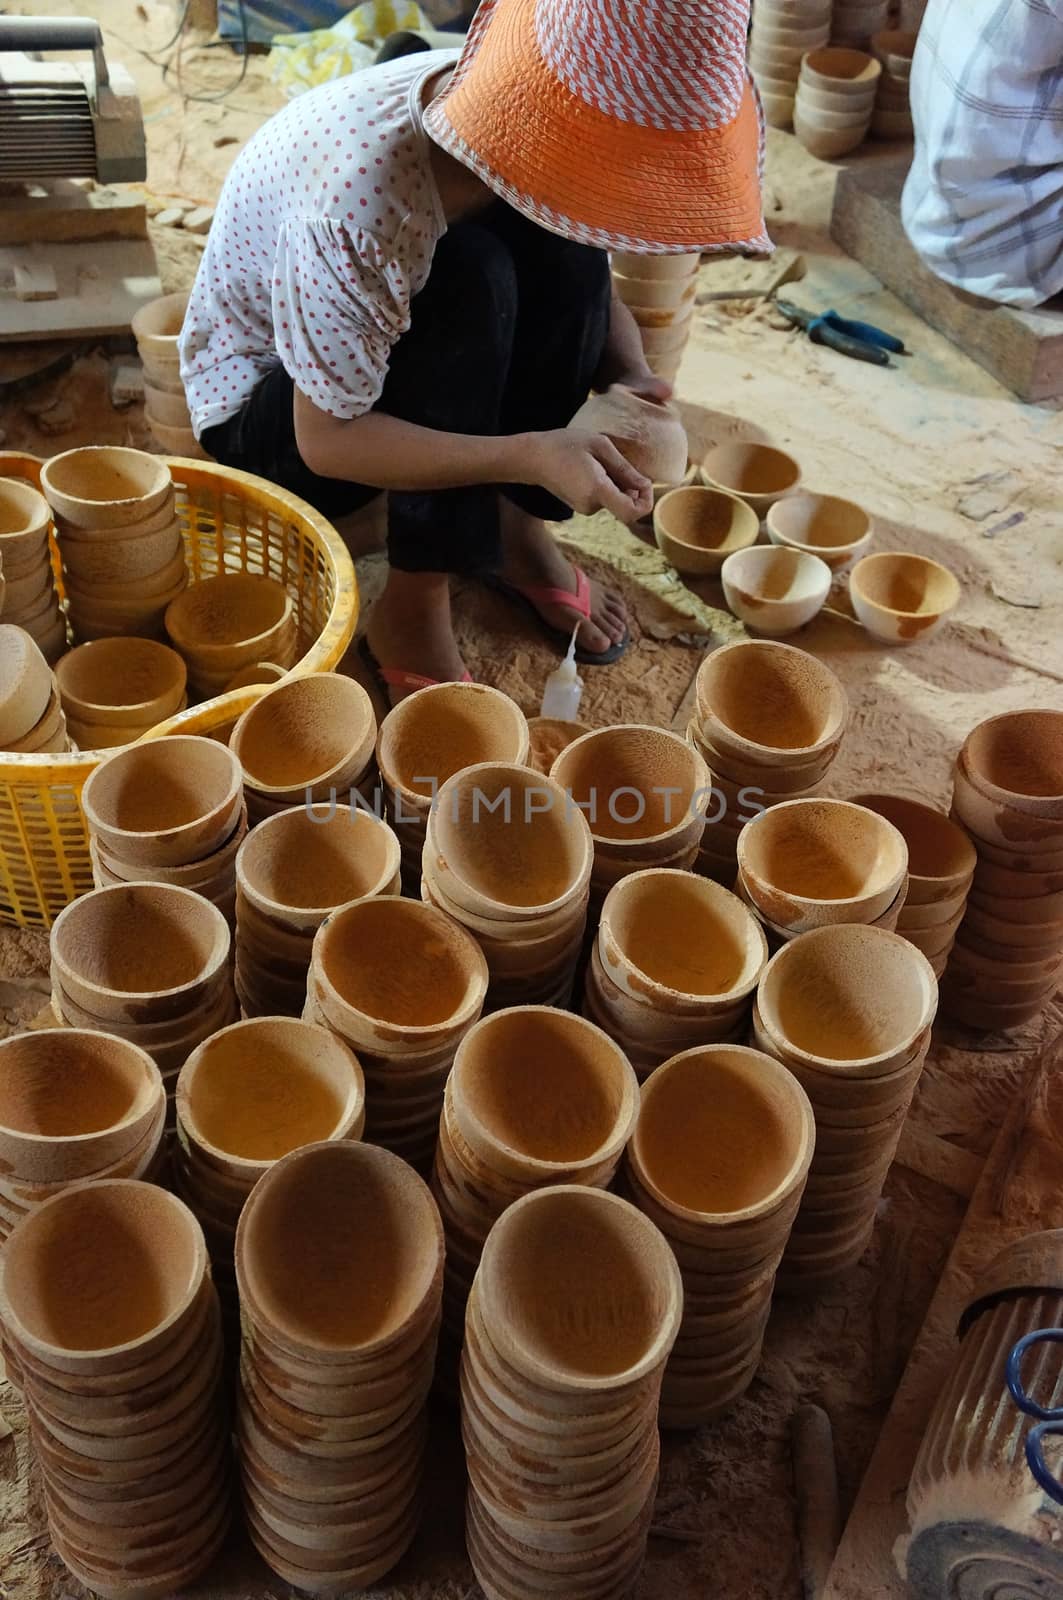 BEN TRE, VIET NAM- JUNE 2: Asian worker working at wood workshop, Vietnamese people make product from coconut tree trunk, tradition craft,  in polluted enviroment, Mekong Delta, Vietnam, June 2, 2015